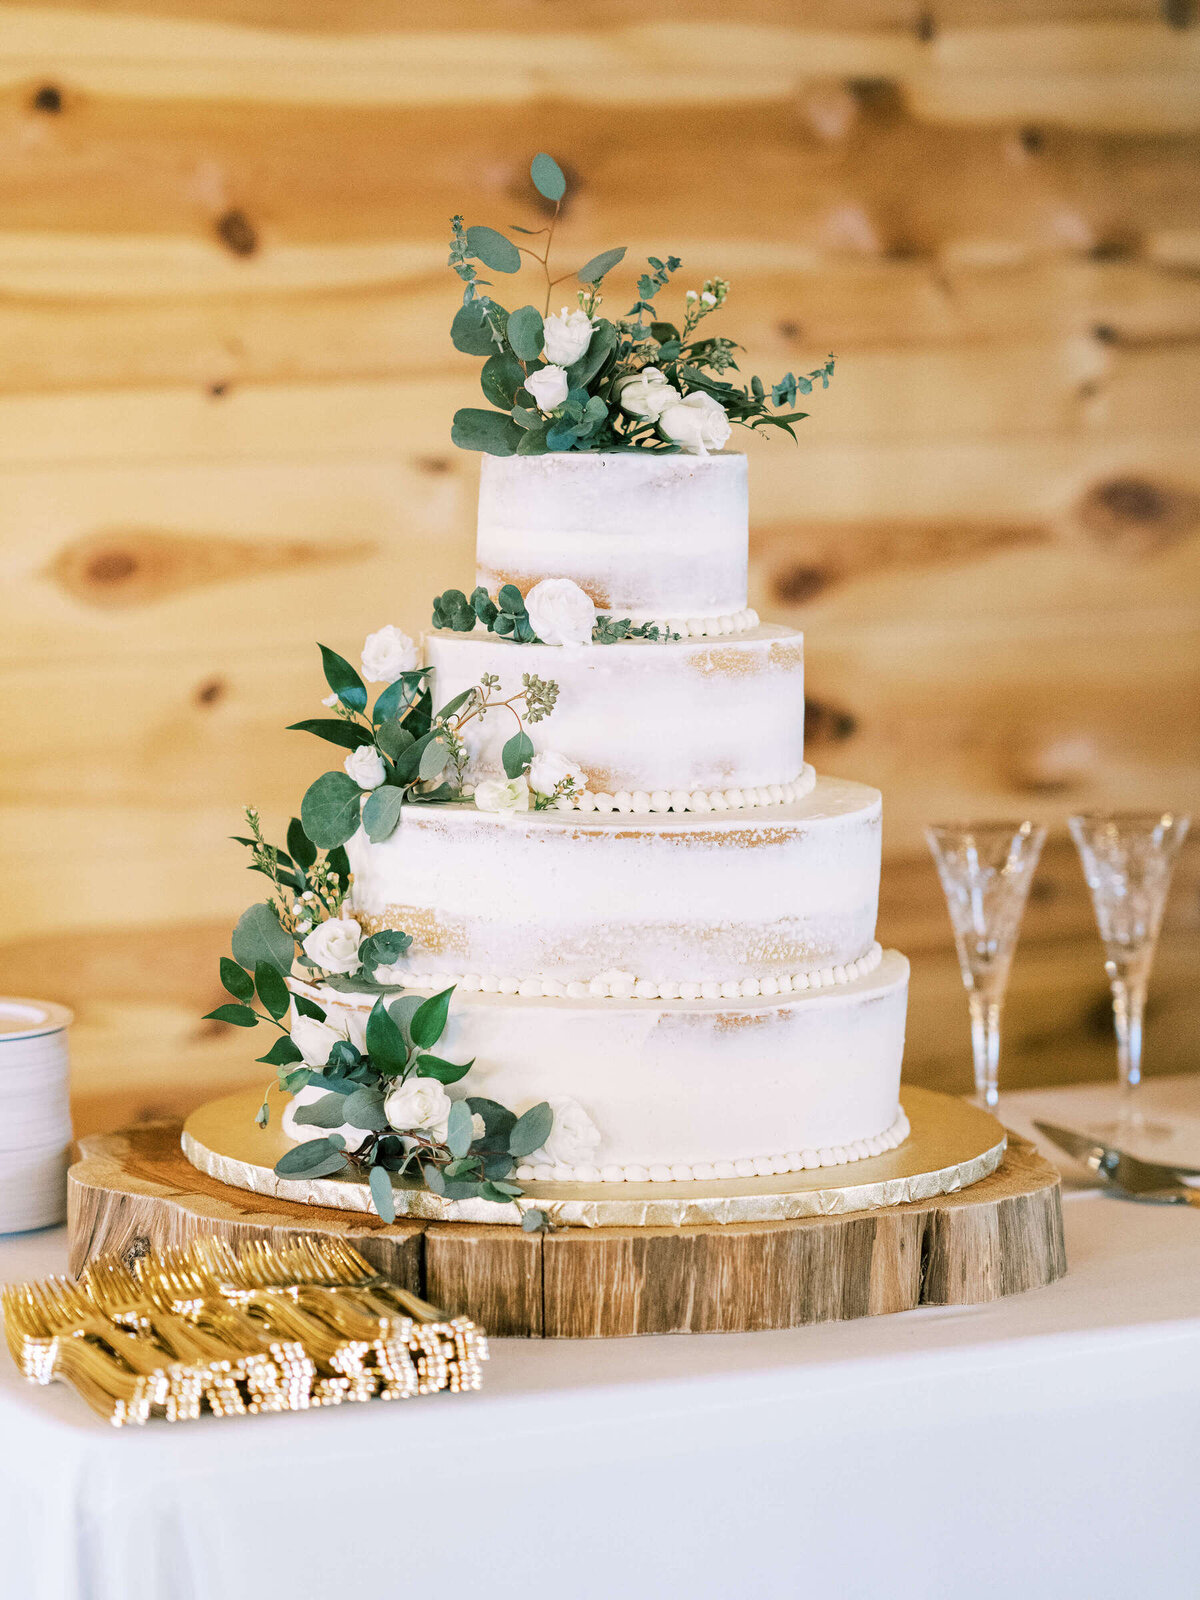 Elegant rustic naked cake with light greenery and white roses